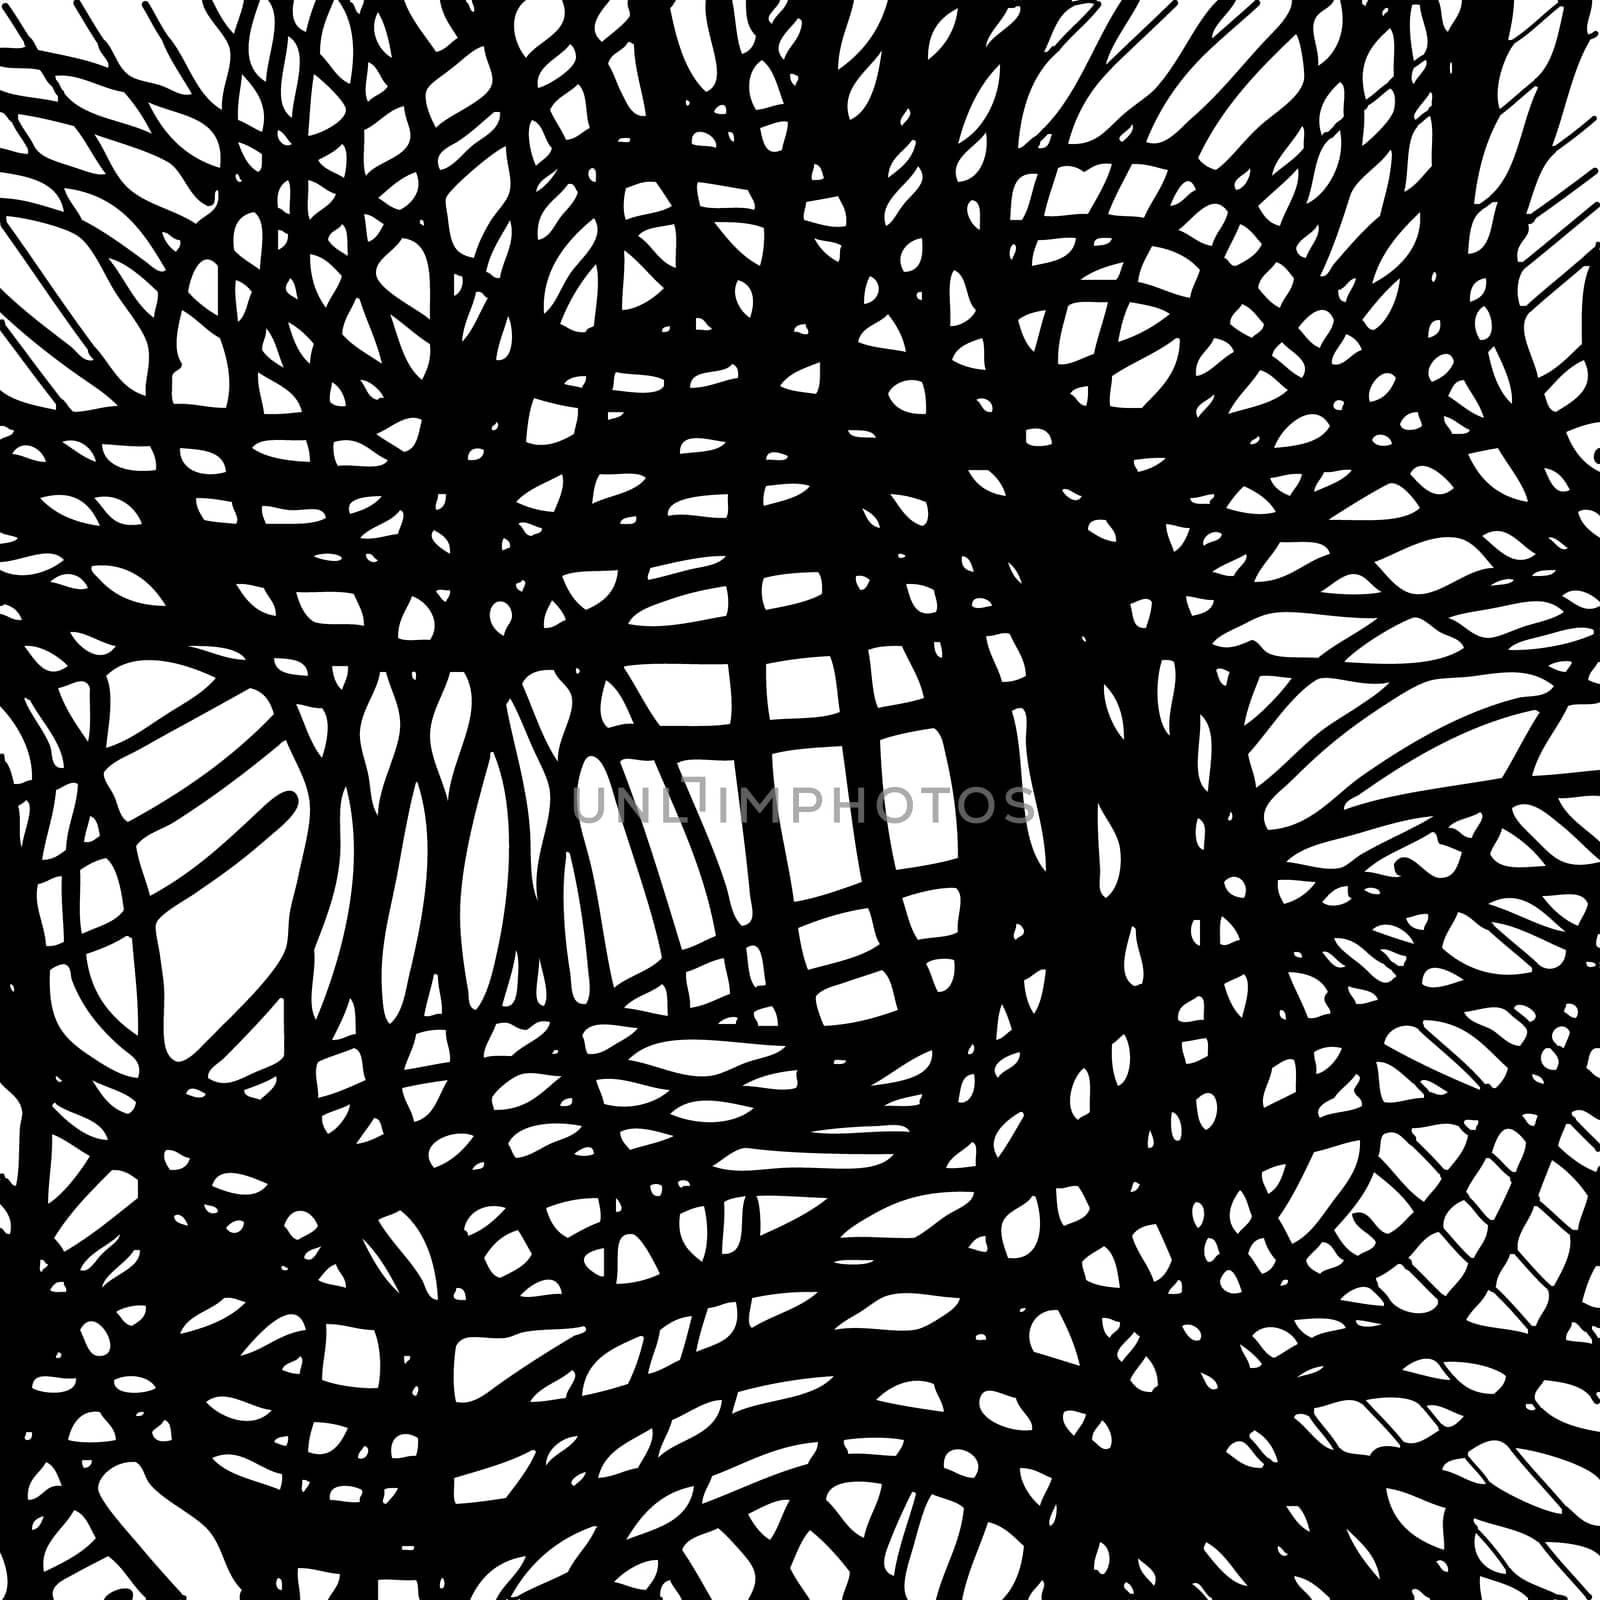 doodle abstract hand drawn pattern on white background .